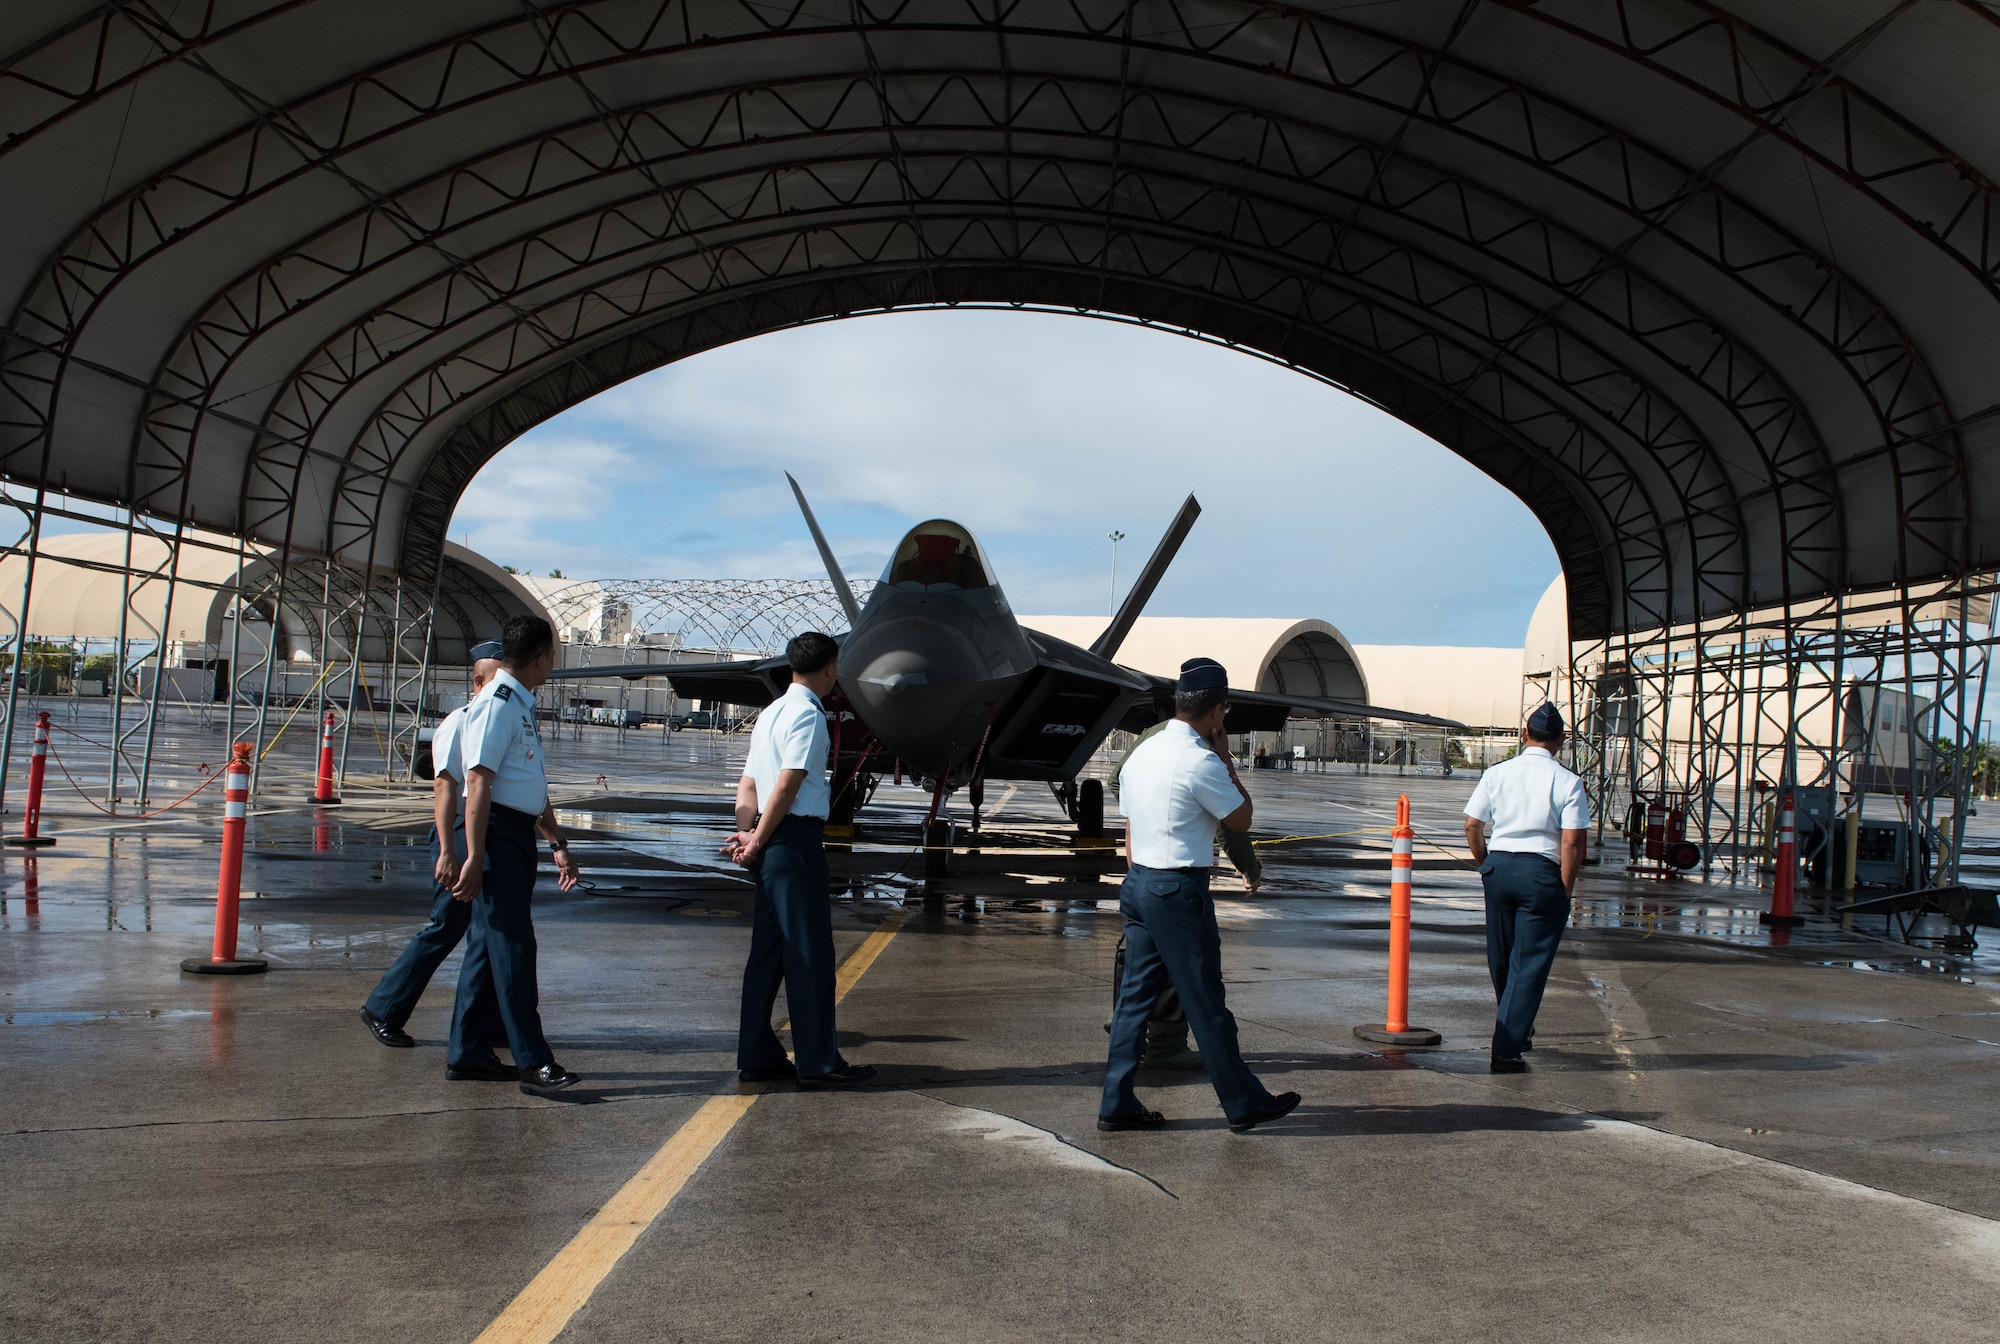 A group of U.S. and Philippine air force Airmen look at an F-22 Raptor during a tour at Joint Base Pearl Harbor-Hickam, Hawaii, Feb. 25, 2019.